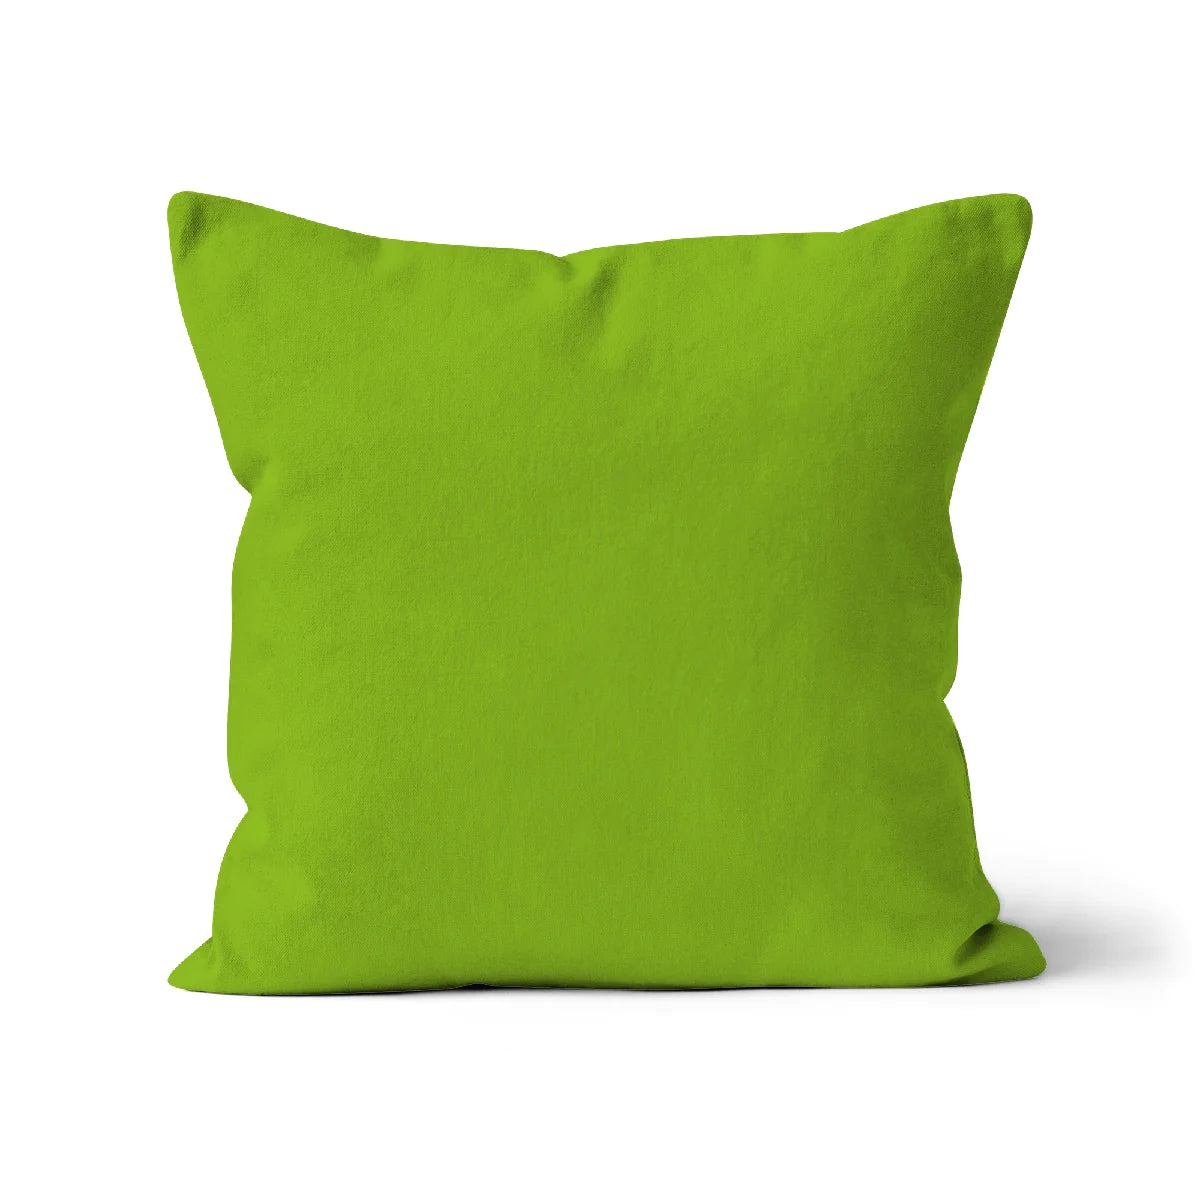 Apple green cotton cushion cover, washable, made in the UK, British made homeware